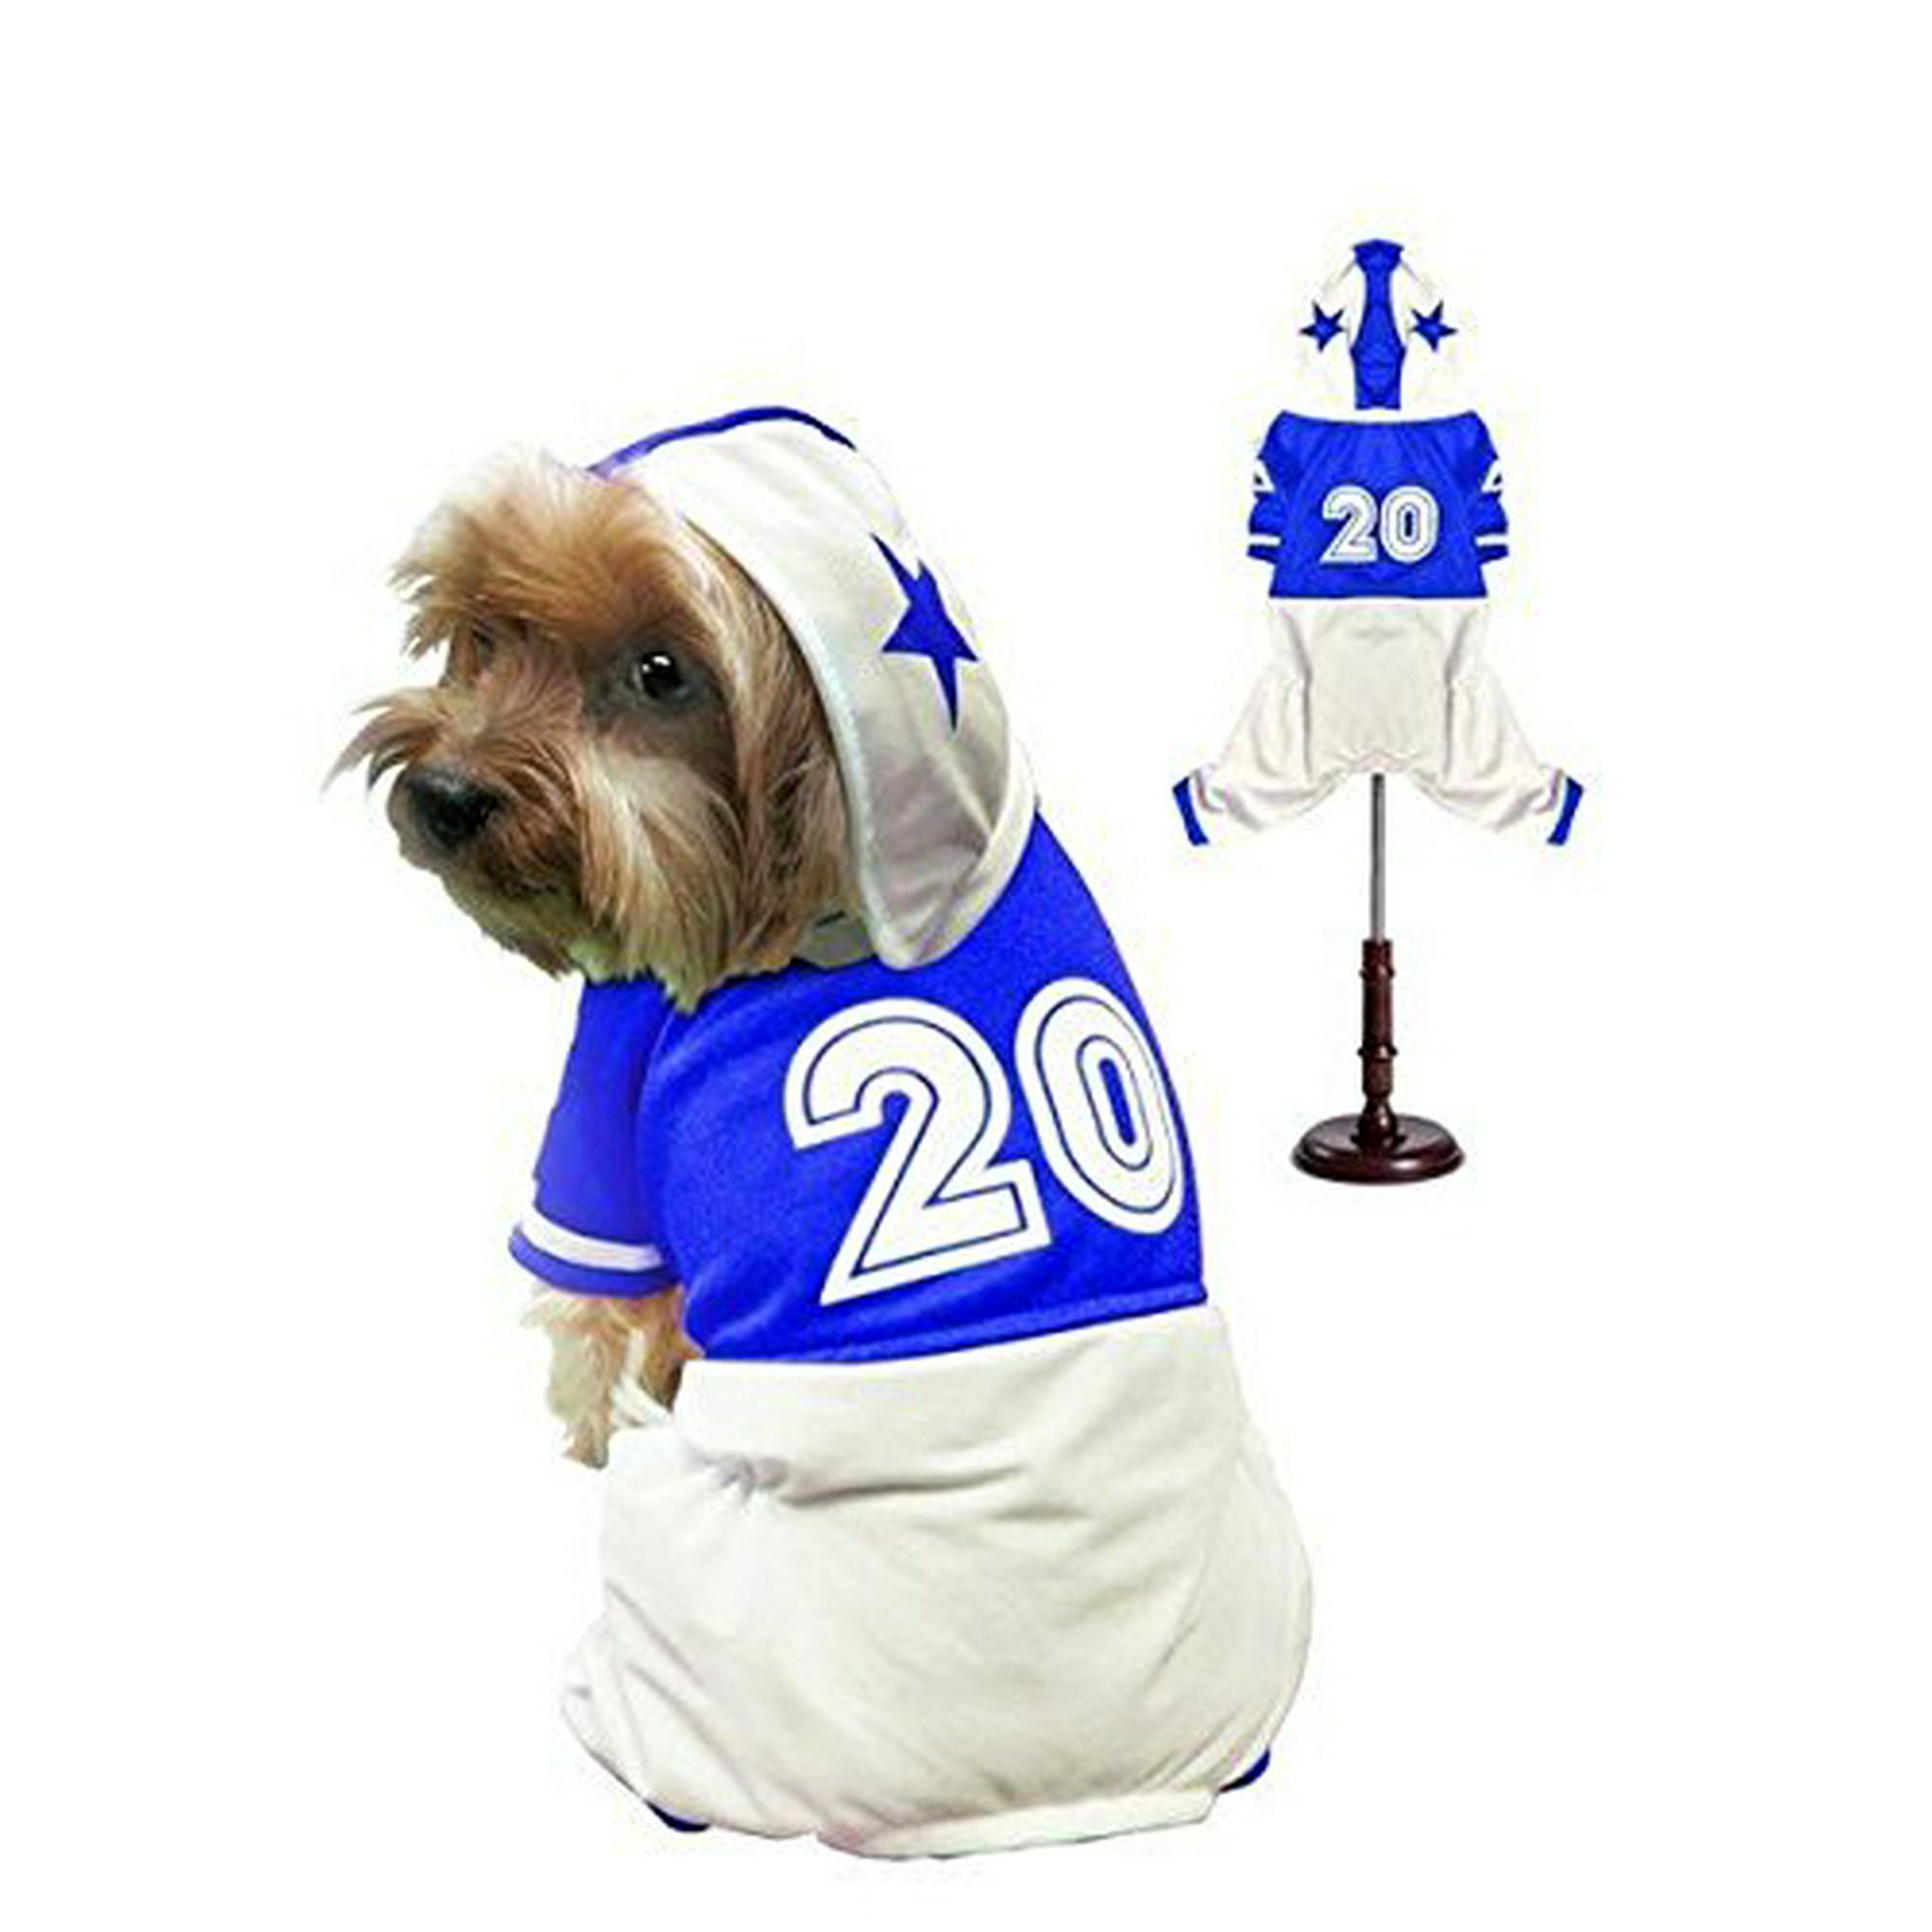 Dog Costume Football Player Athlete Jock Jersey Choose Blue or Red (Size 1  Blue)